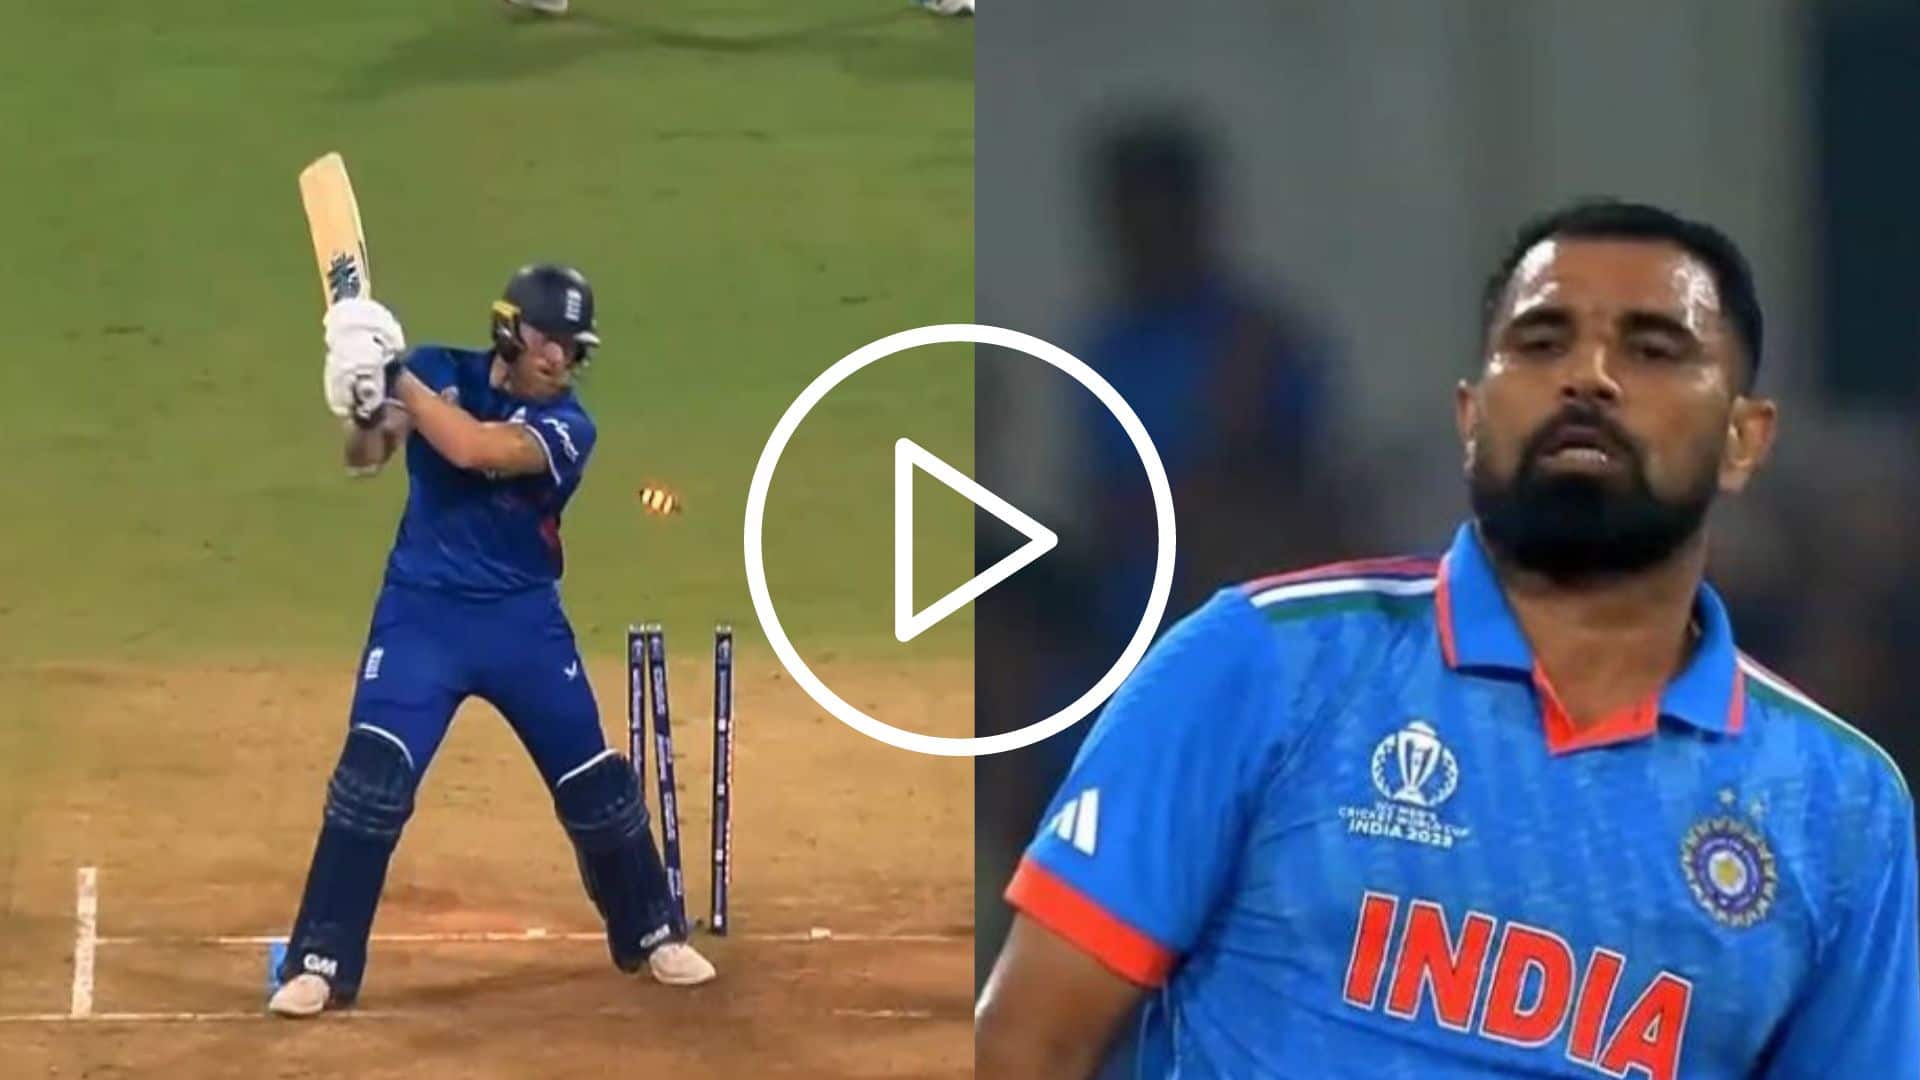 [Watch] Mohammed Shami Castles Ben Stokes With An Absolute Ripper